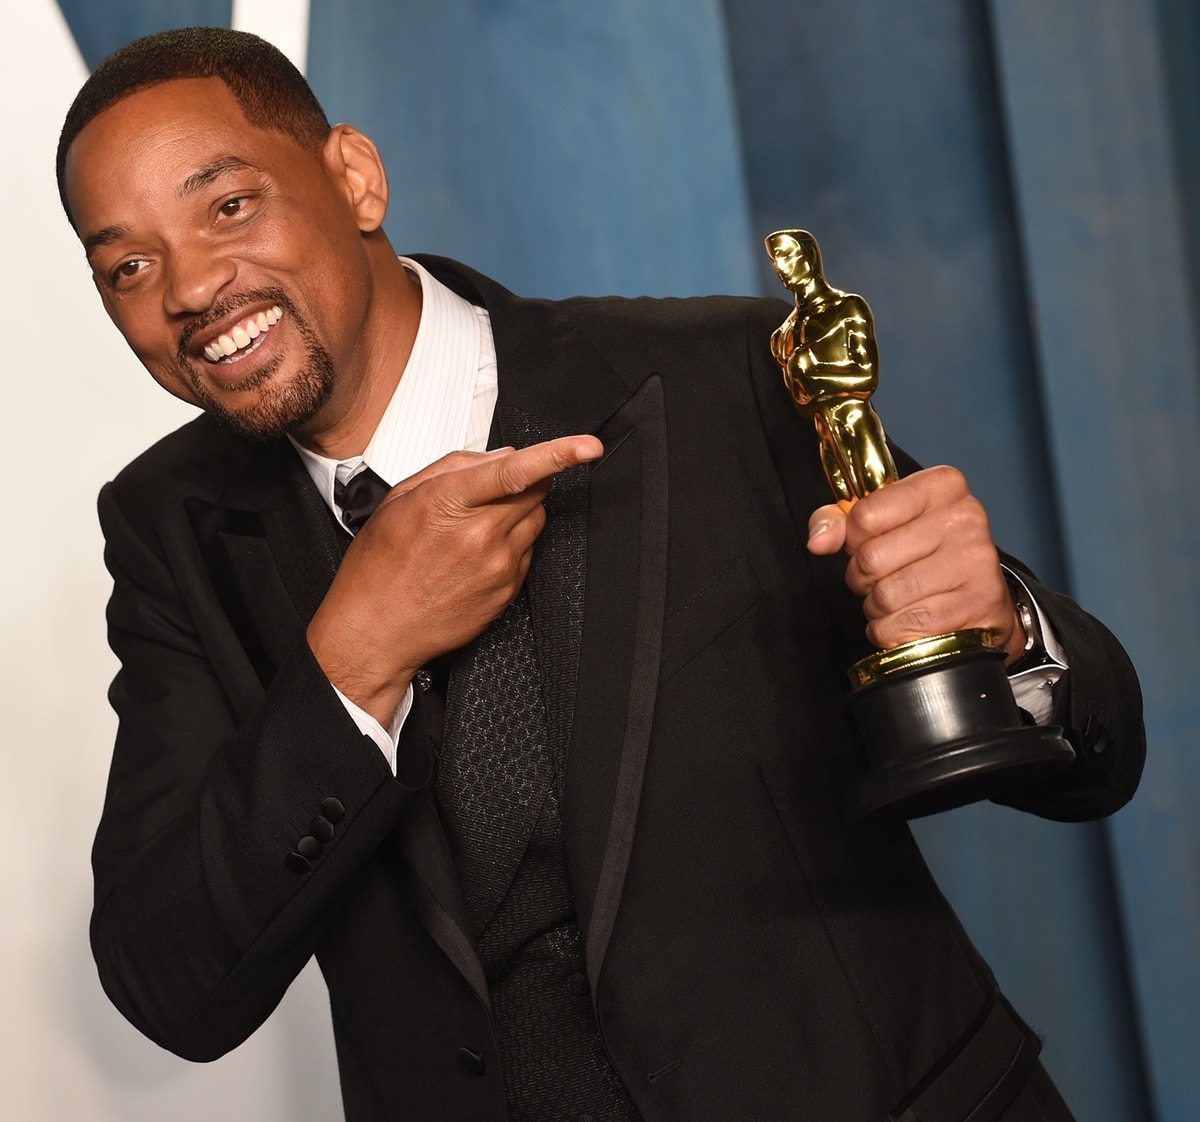 Will Smith won Best Actor at the 2022 Academy Awards after hitting Chris Rock